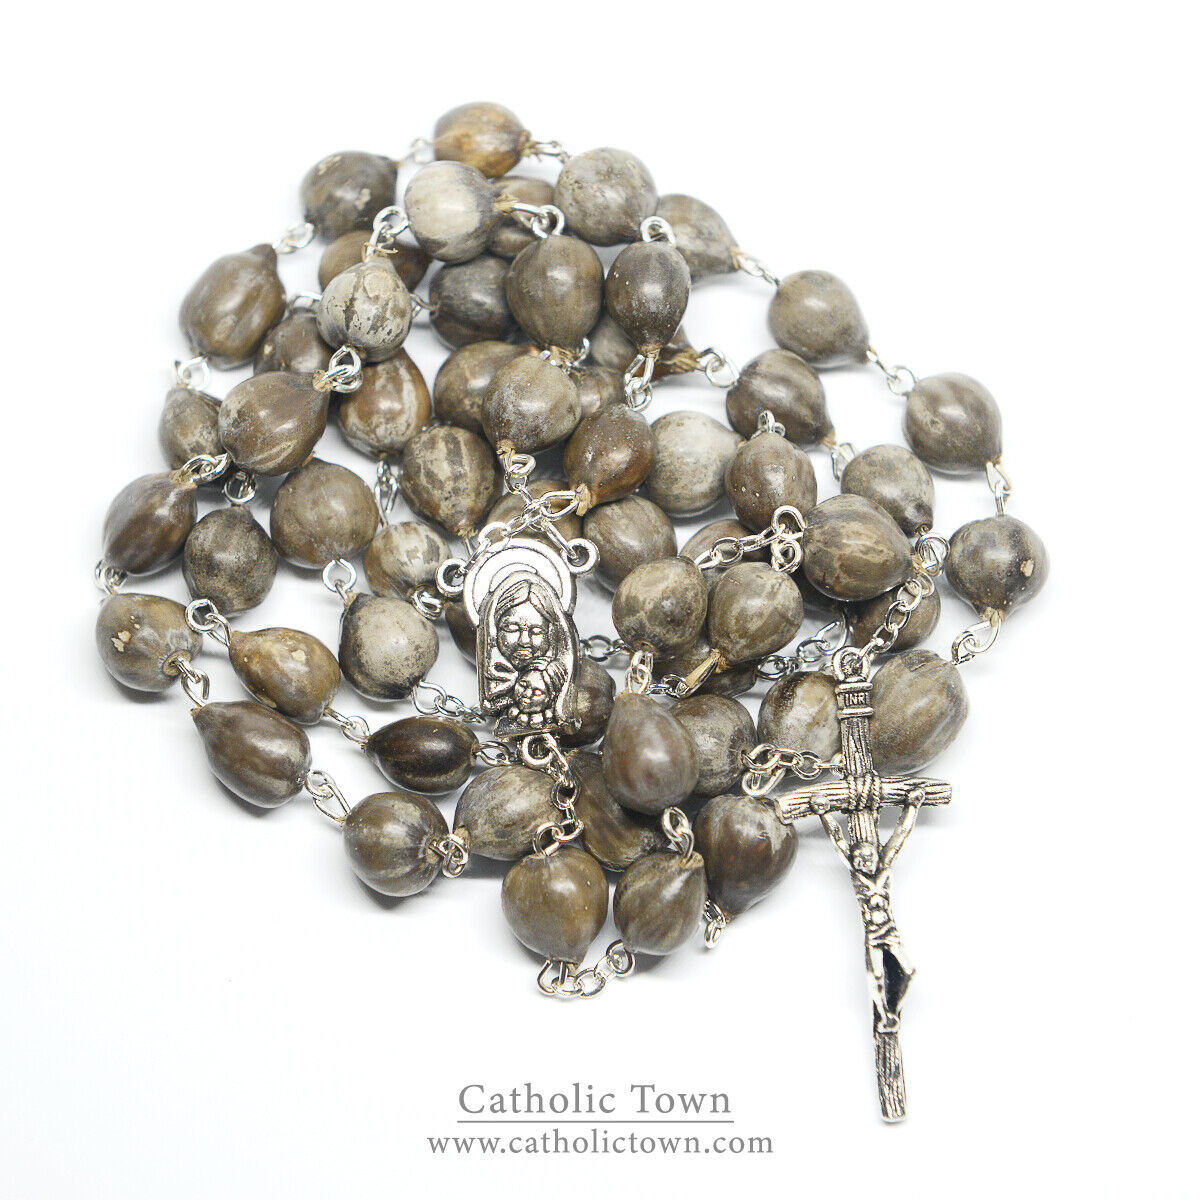 Catholic JOB'S TEARS Seed Bead Rosary with Madonna and Child medal and Crucifix 